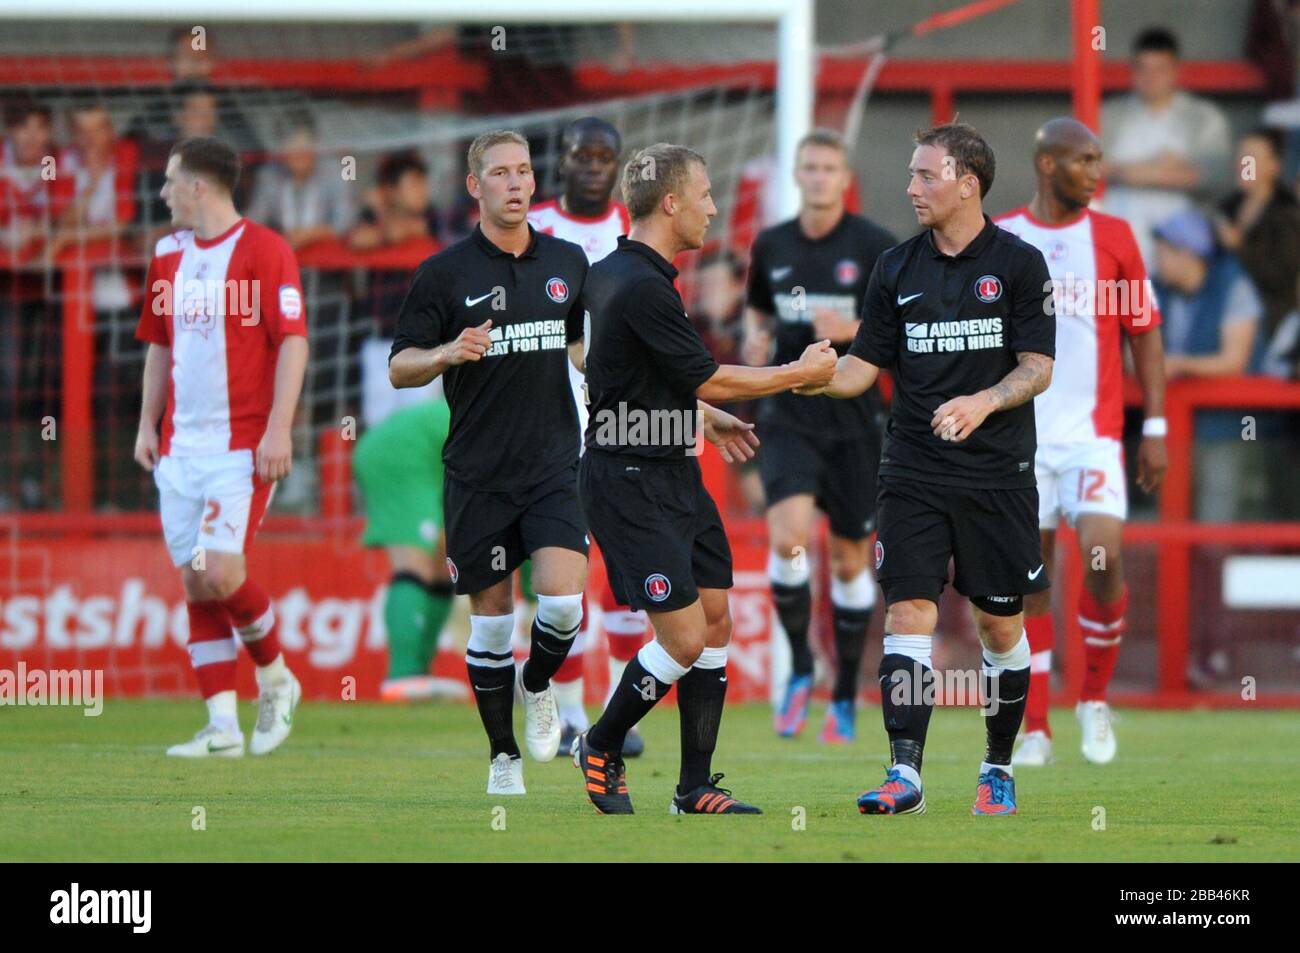 Danny Green of Charlton Athletic (right) celebrates his goal during the friendly match at the Broadfield Stadium, Crawley Stock Photo